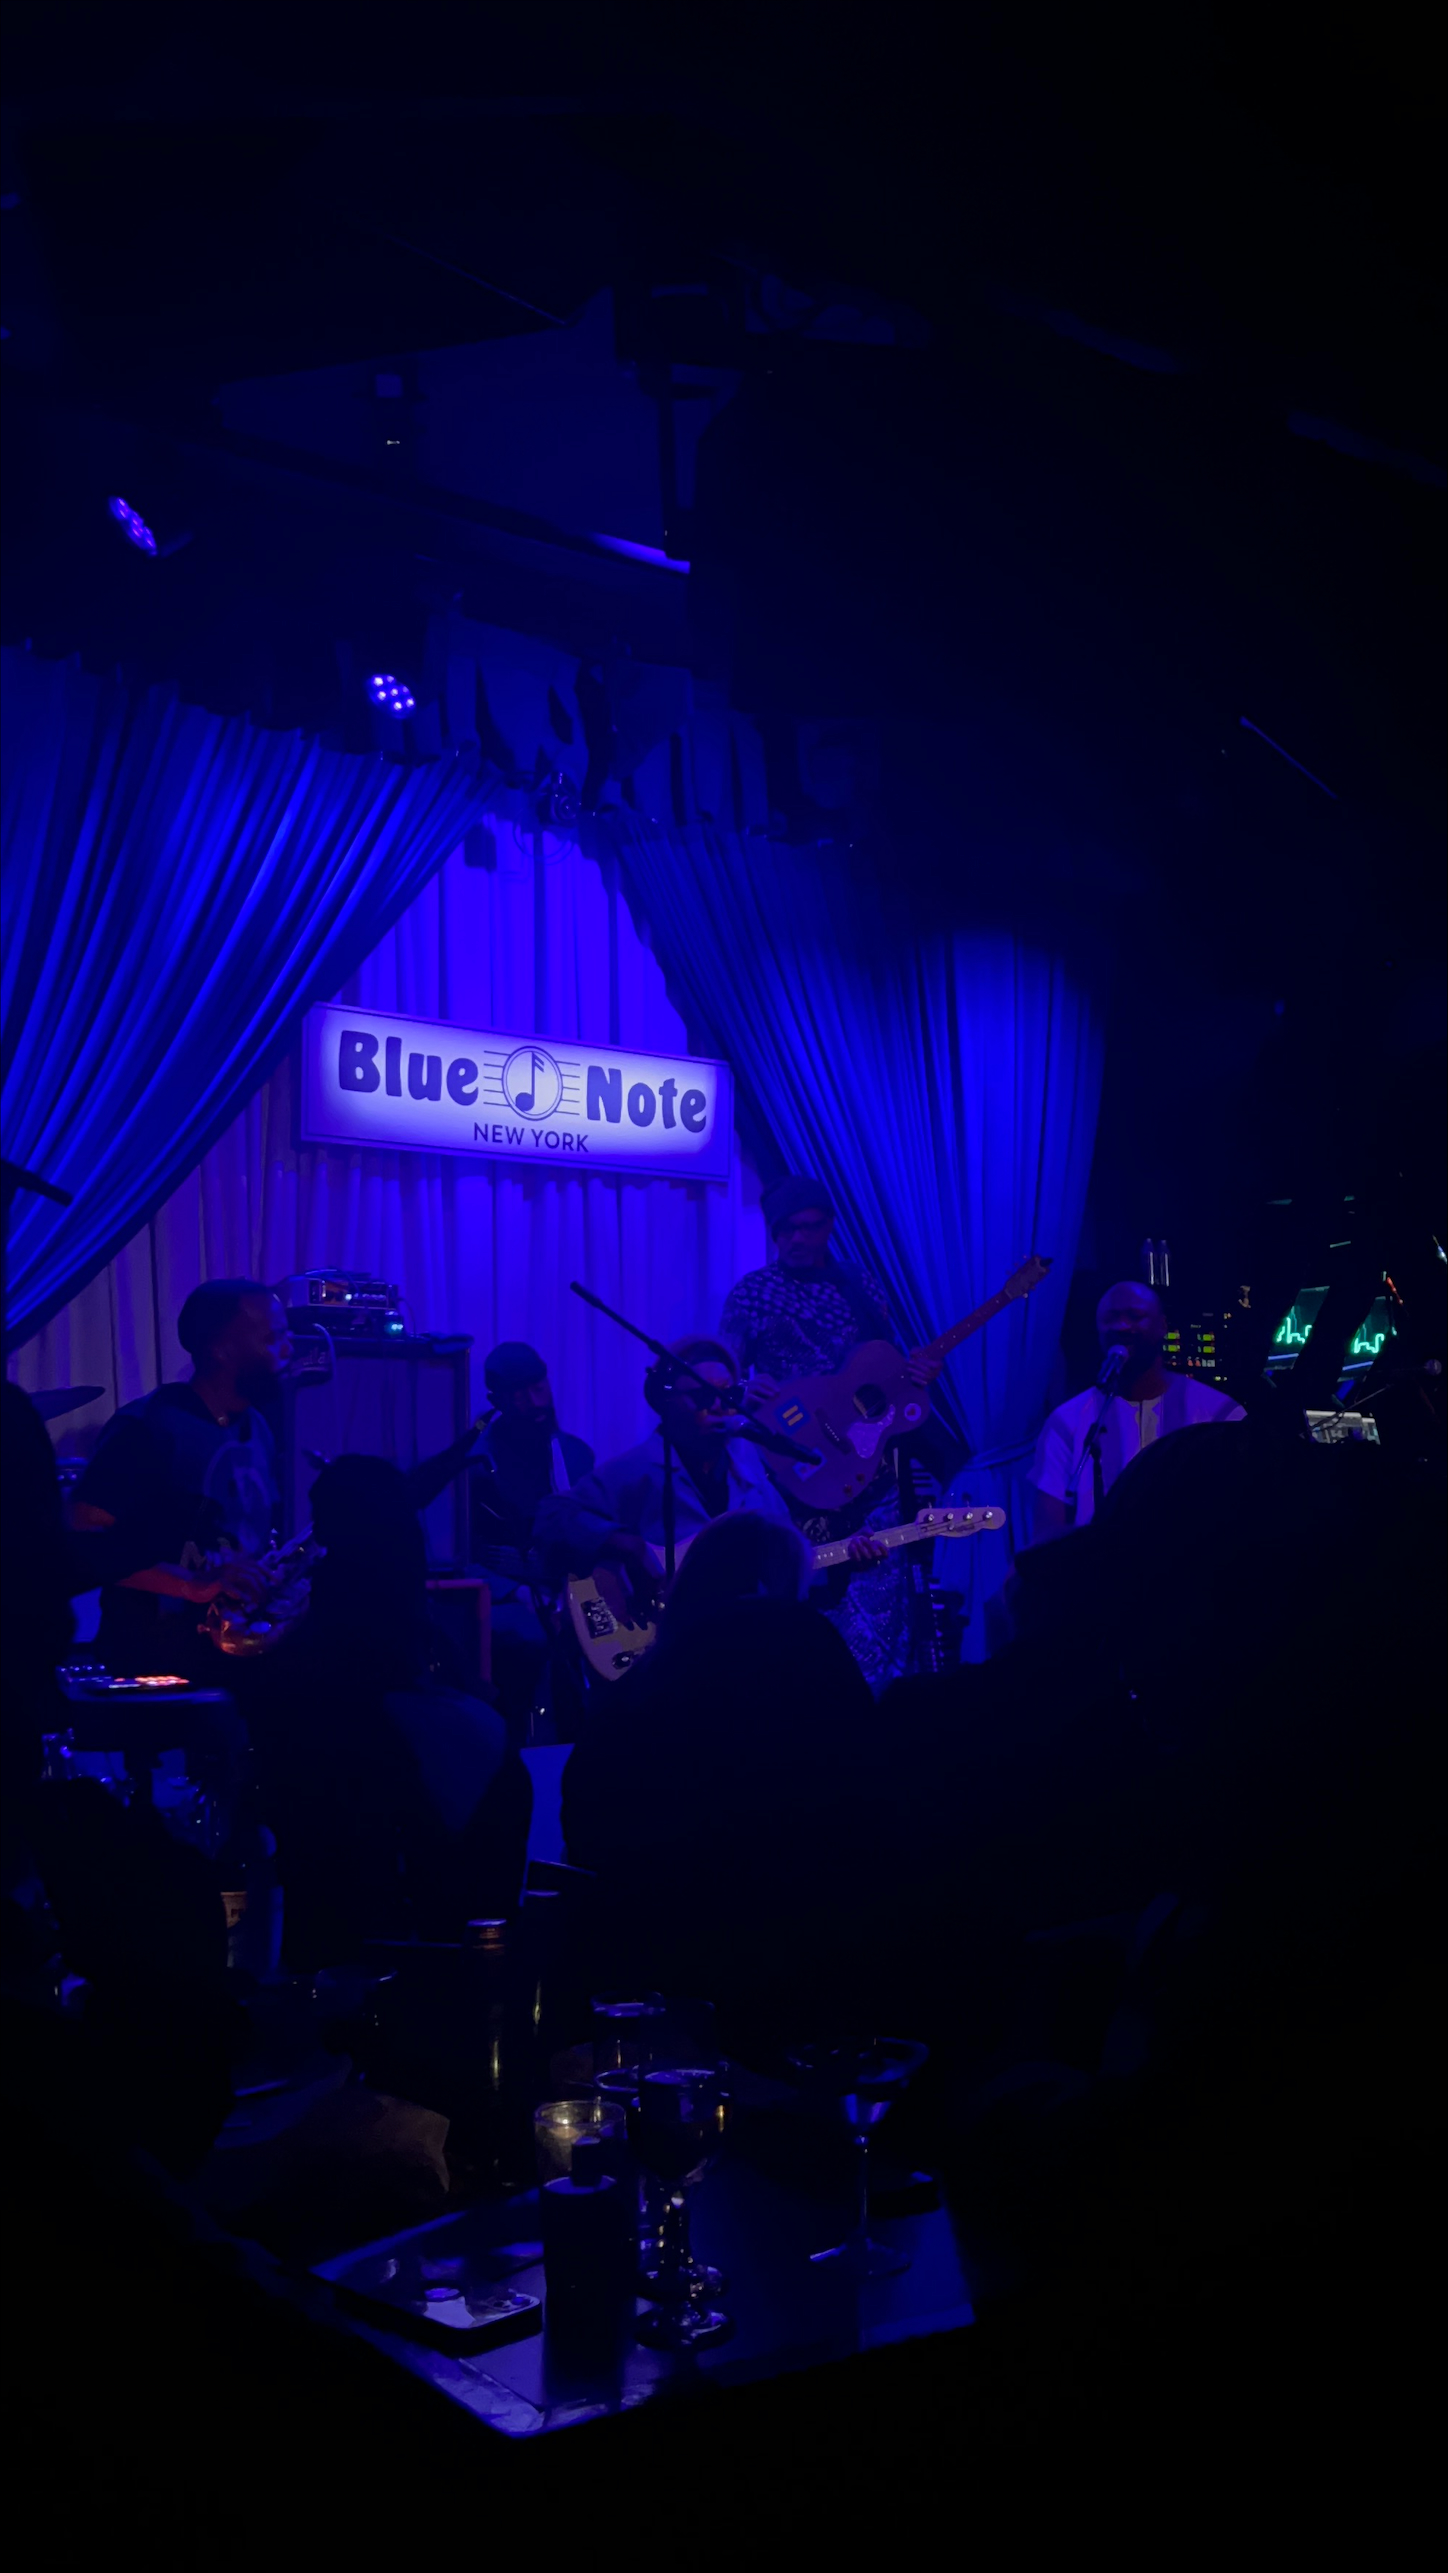 Blue note band performing in New York